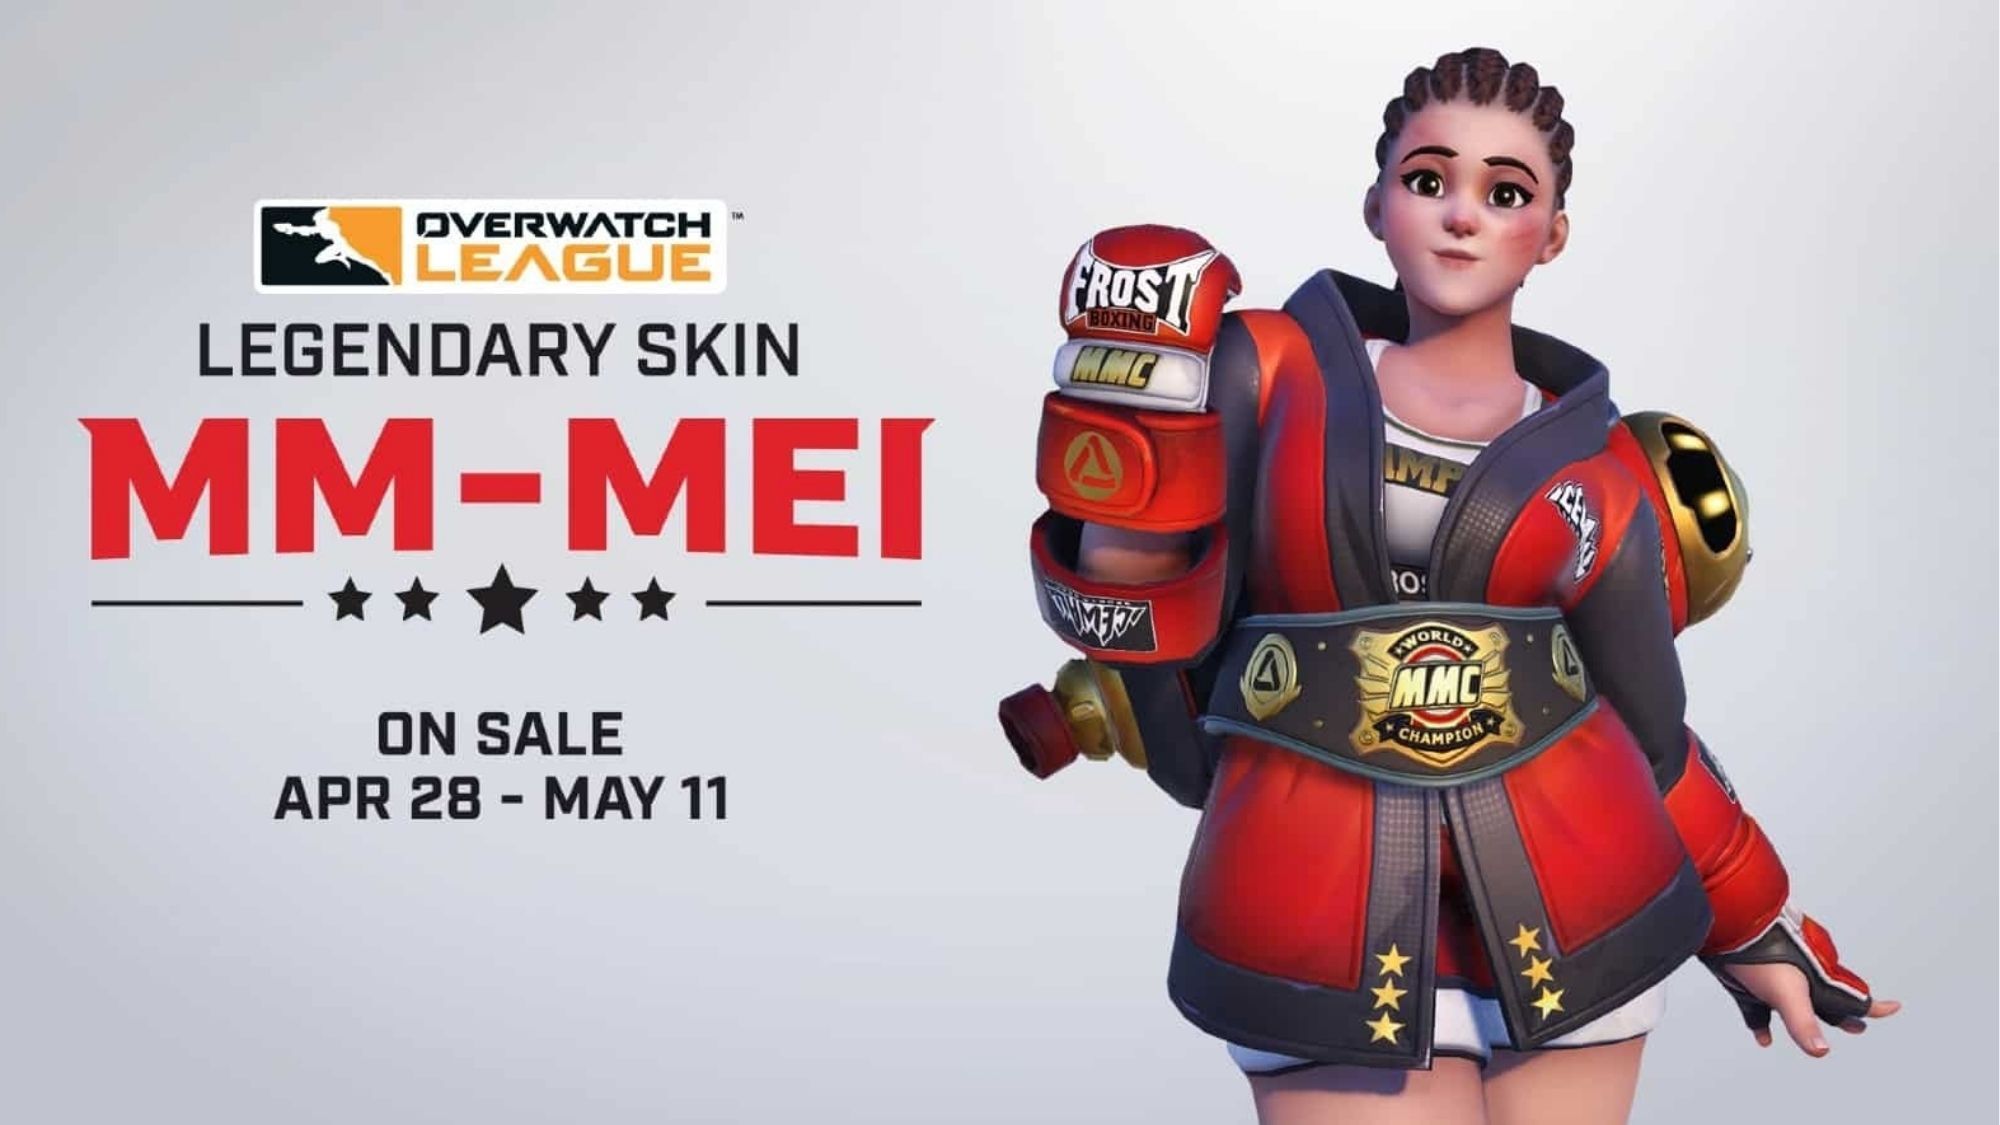 Overwatch’s new skin is getting criticism for cultural appropriation